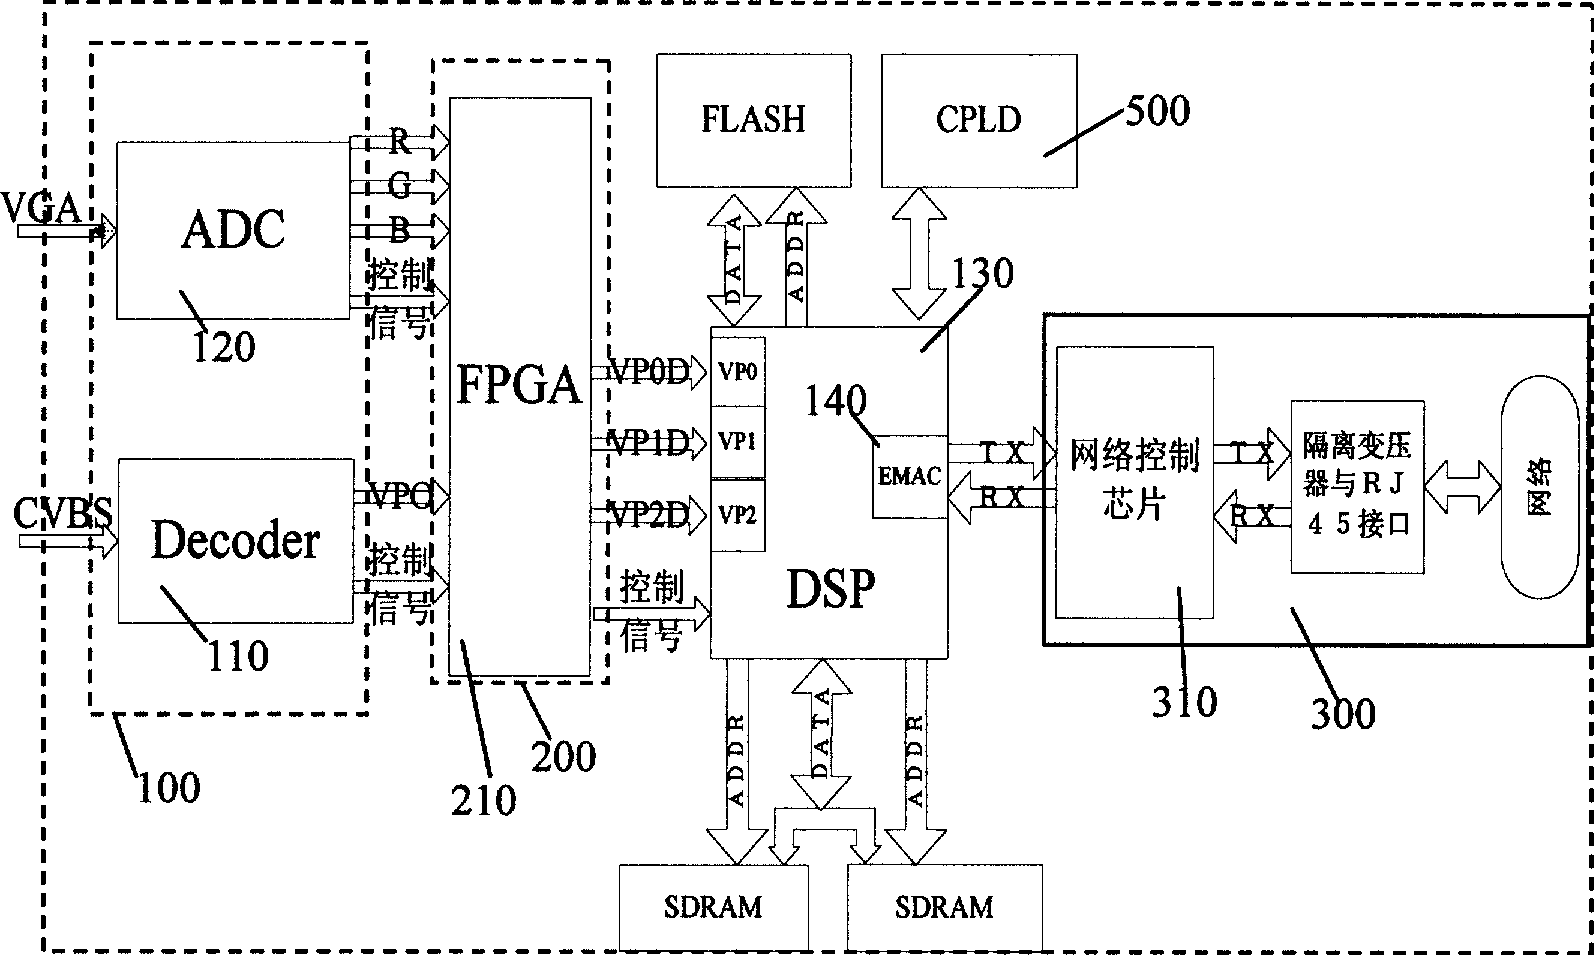 Network real-time video collecting apparatus developed based on FPGA chip and DSP chip